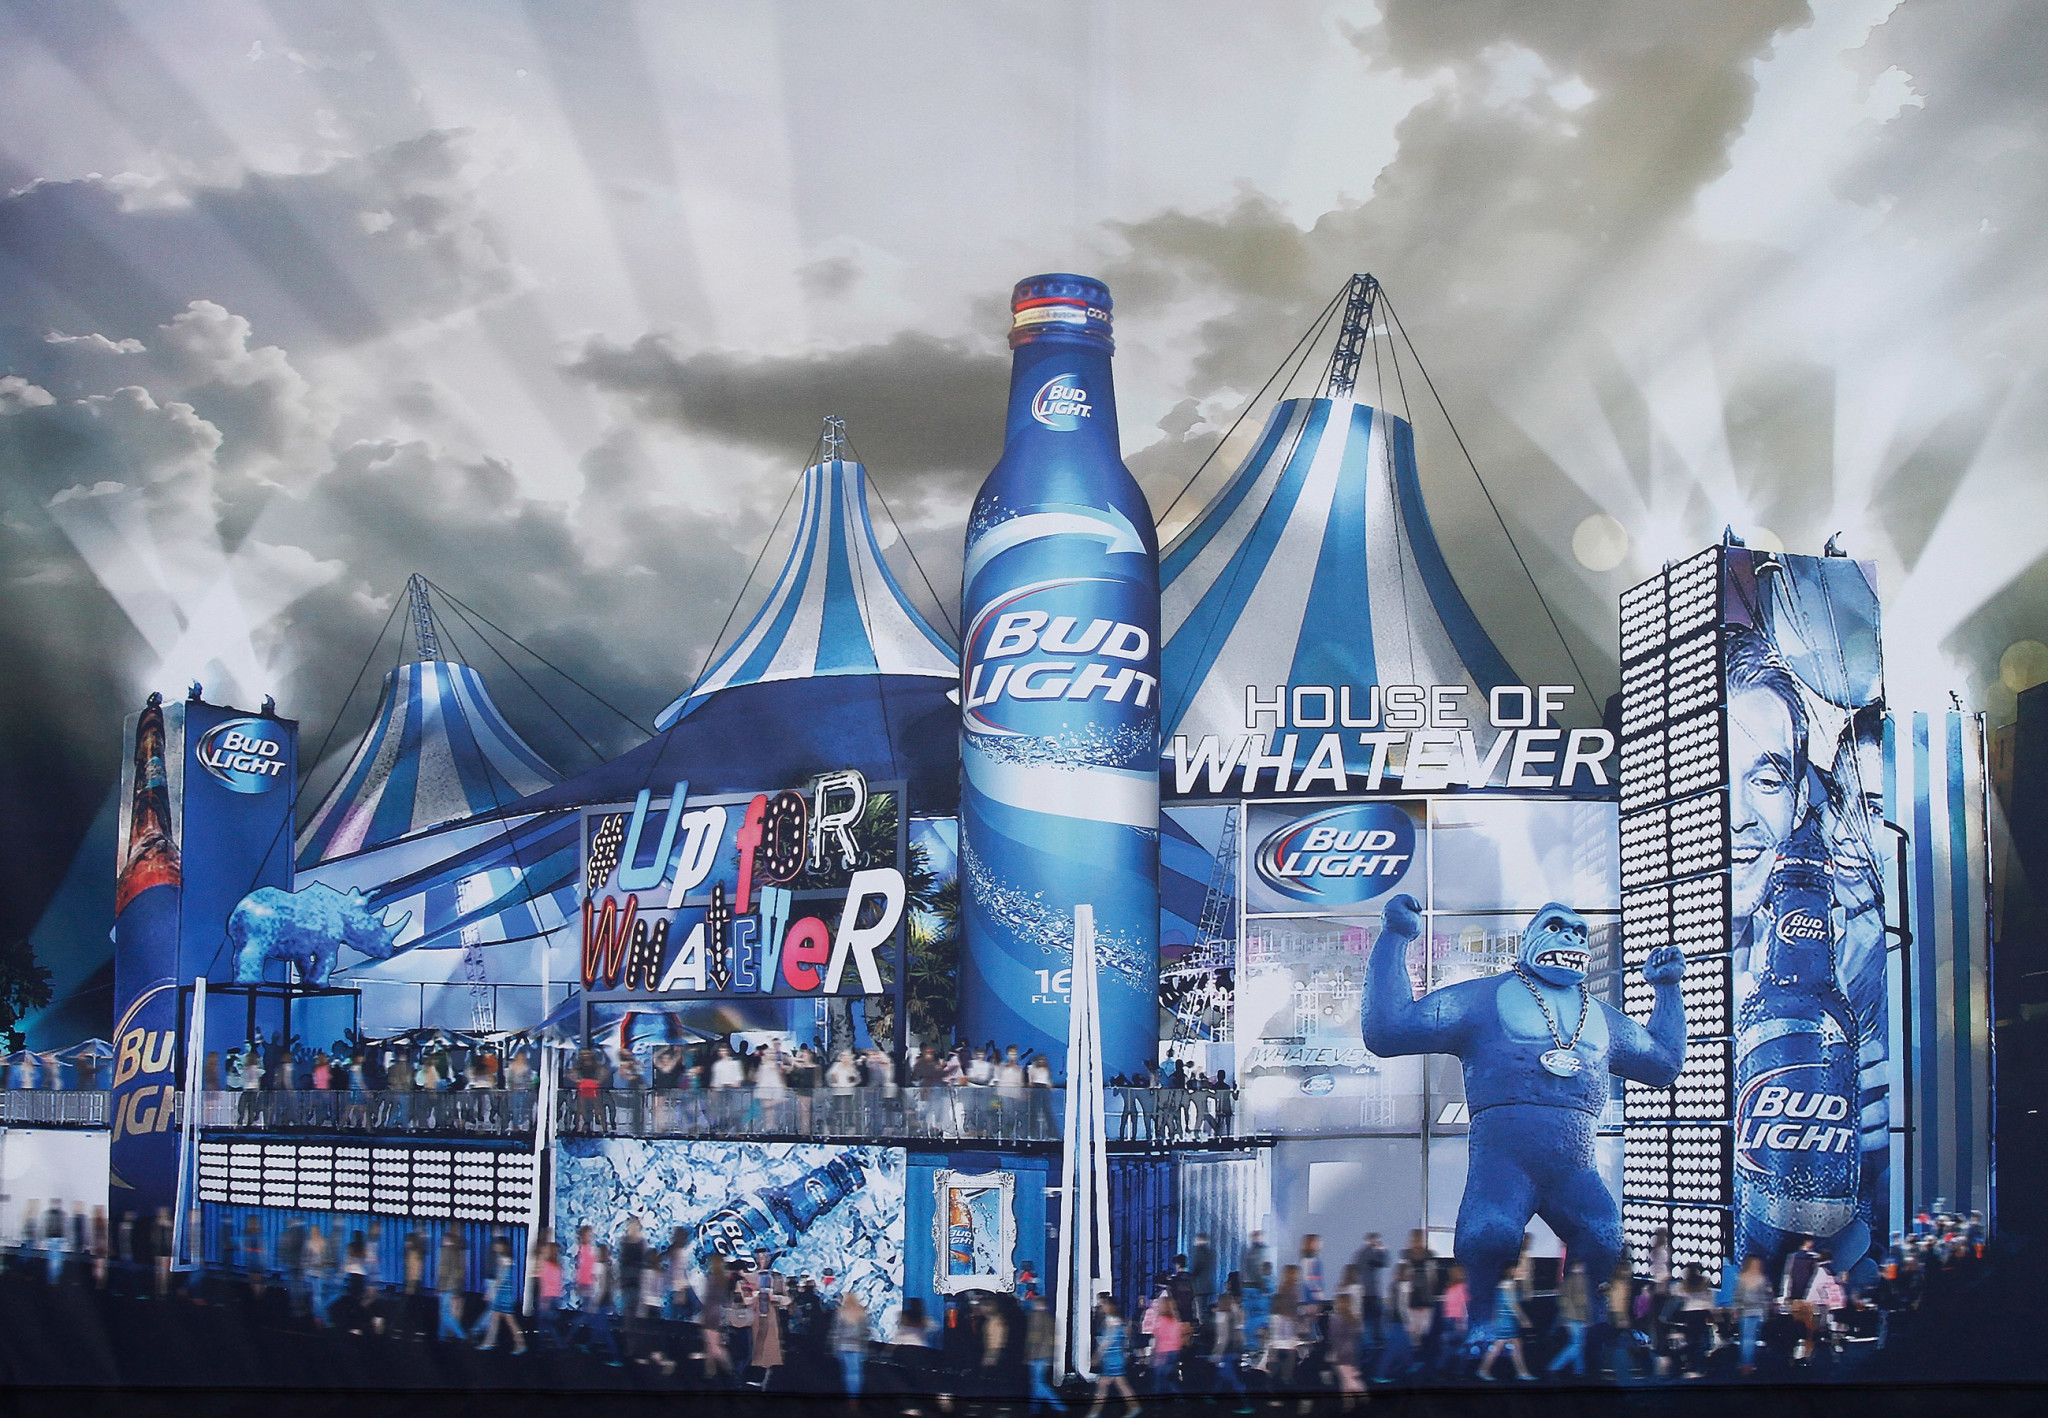 Bud Light Will Prove It's Still Up For Whatever At Super Bowl XLIX...